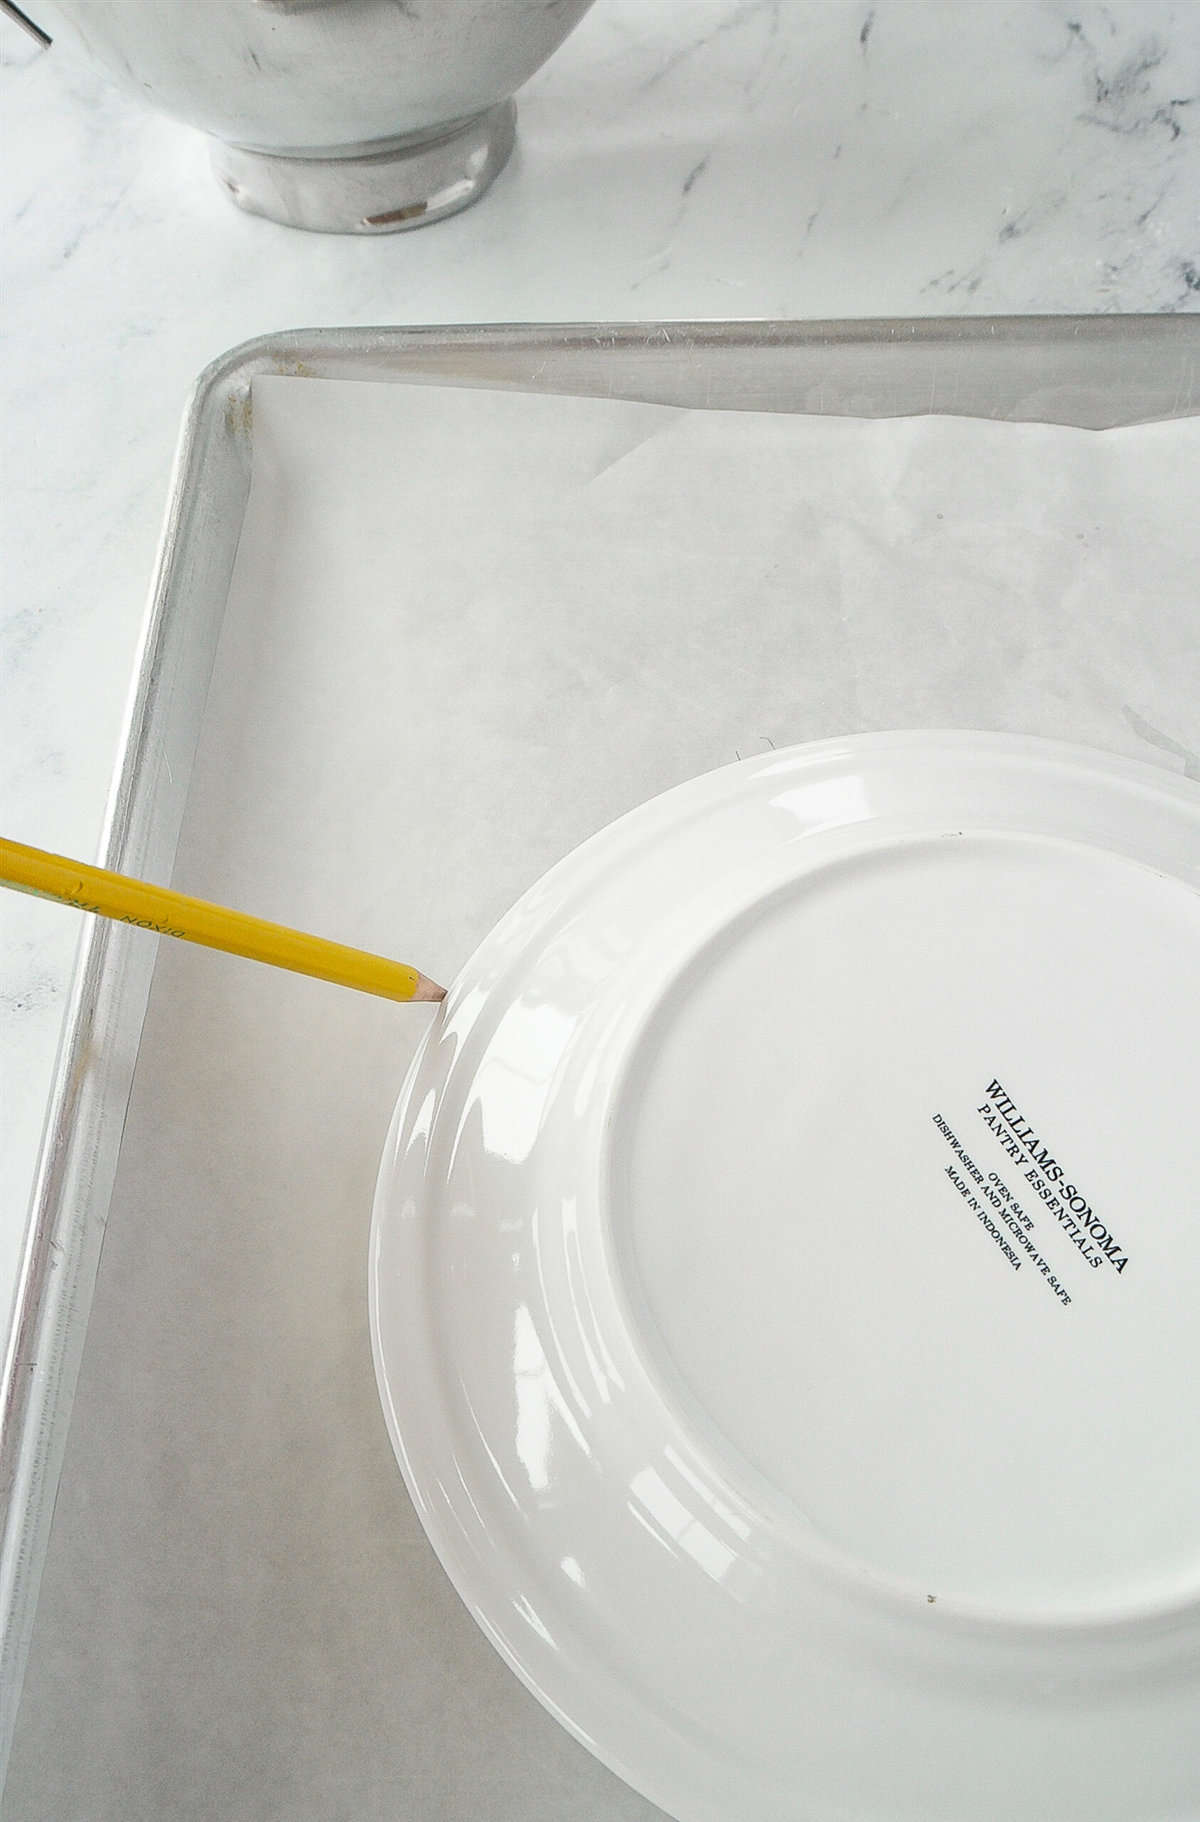 tracing around a plate onto parchment paper